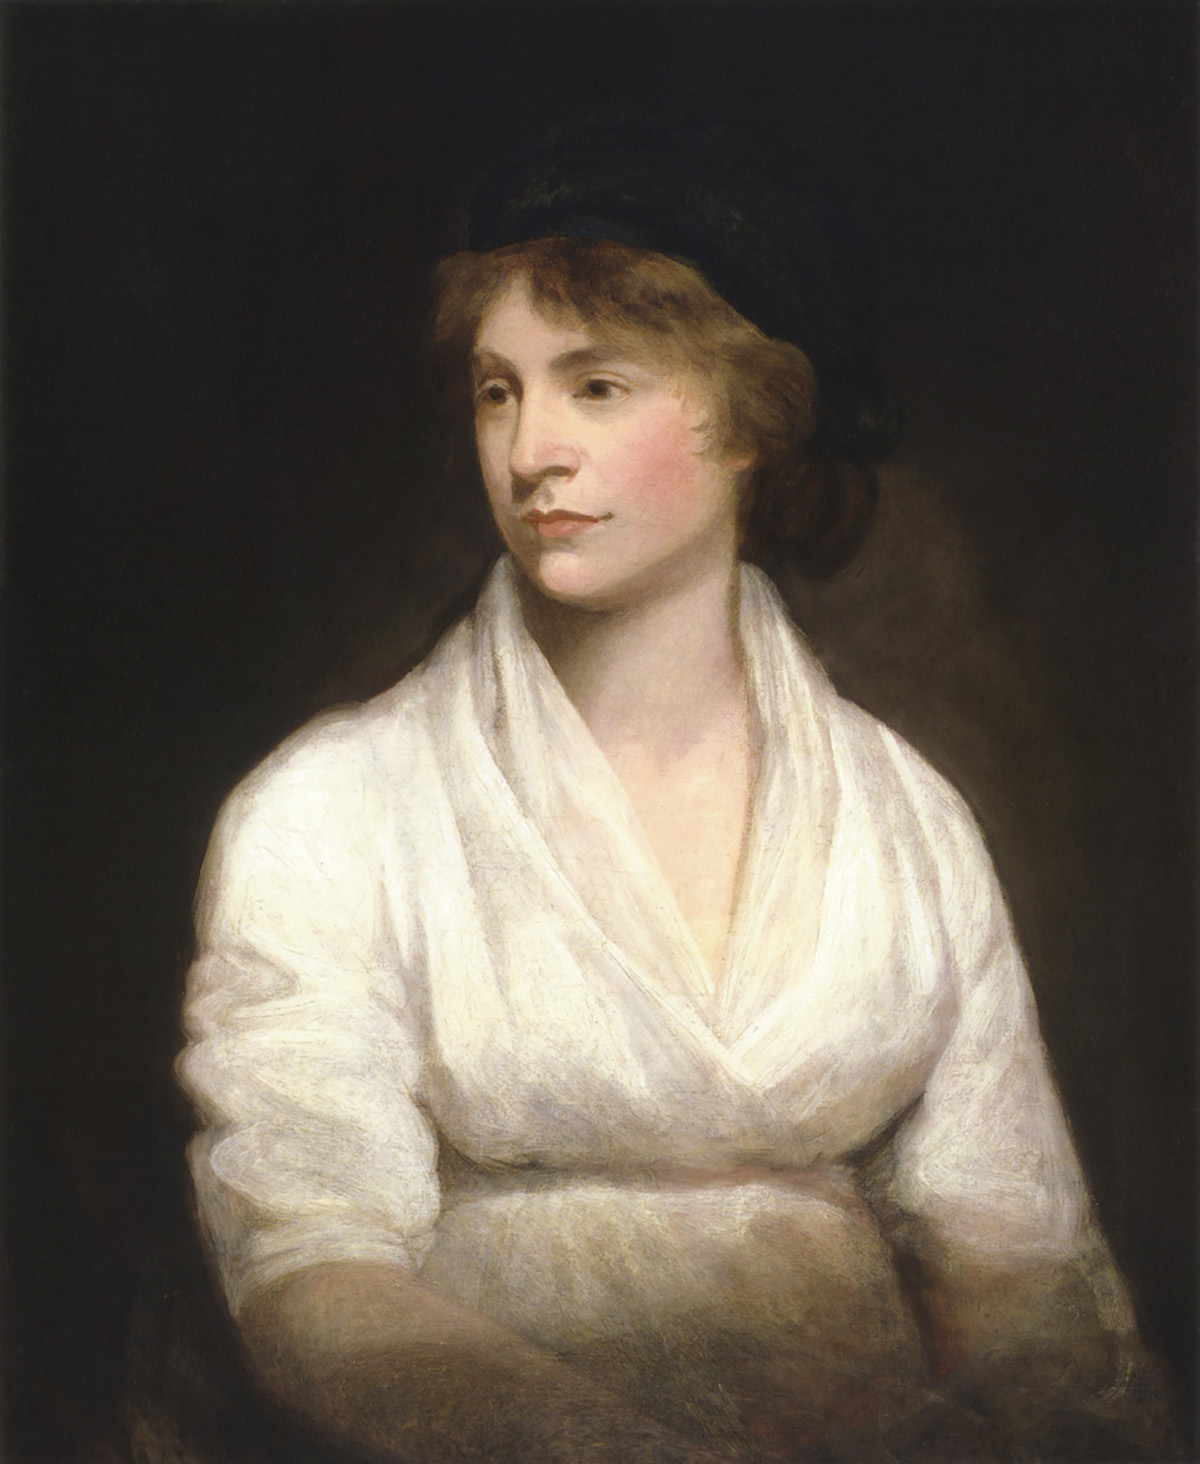 Mary Wollstonecraft, as captured by artist John Opie, c. 1797. She died shortly after this portrait was completed. (Wikimedia Commons)